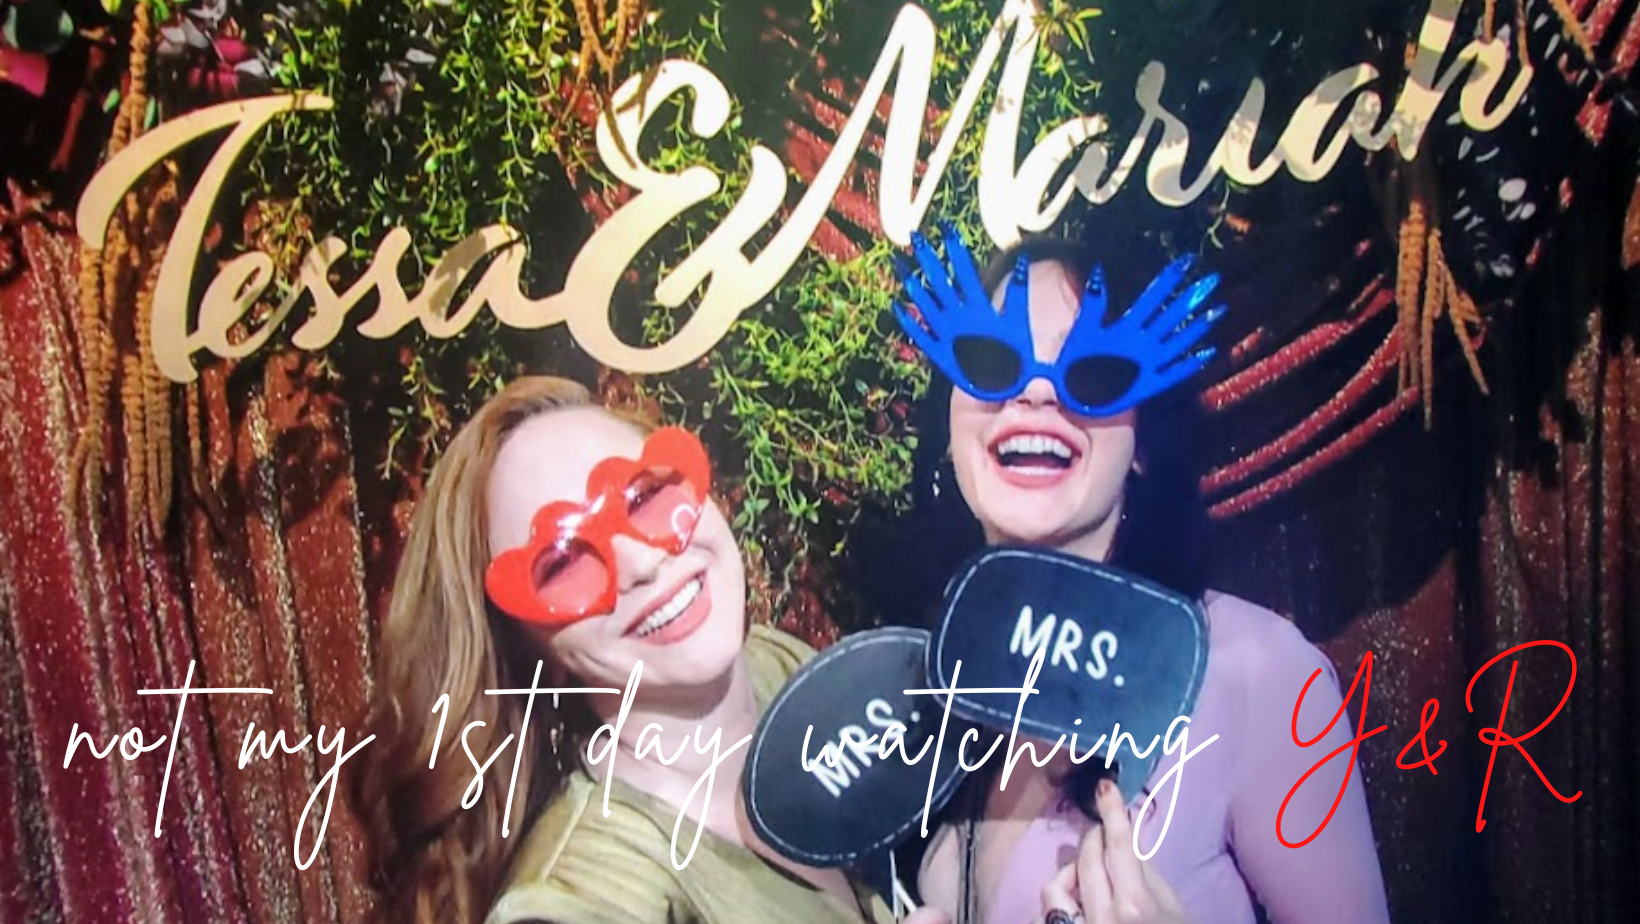 Mariah & Tessa Celebrate, Engaged to Be Married on Y&R